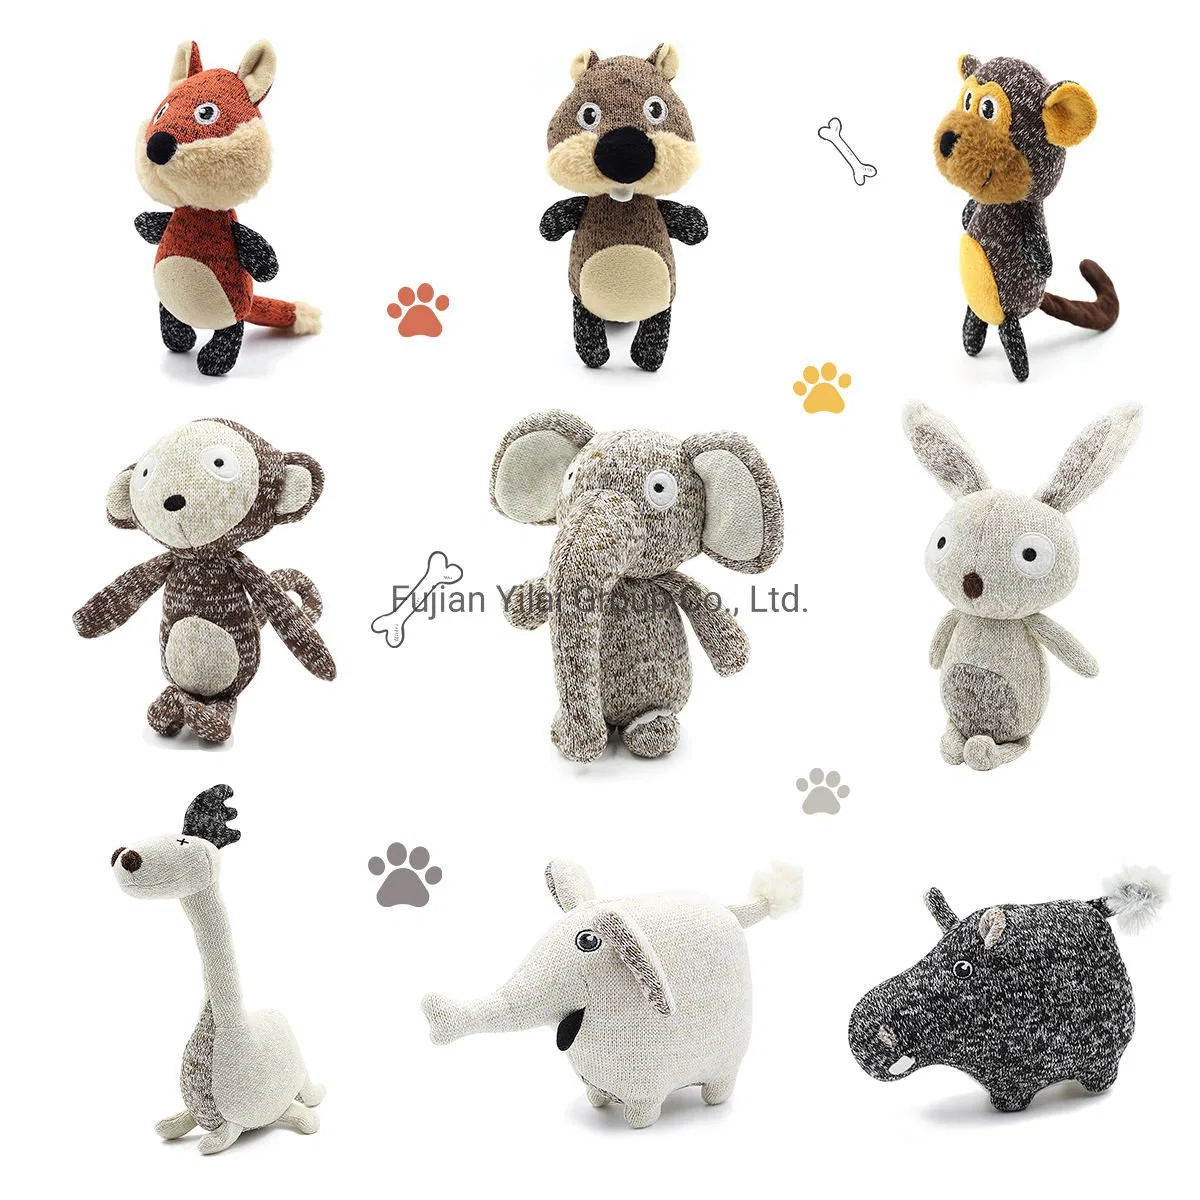 Creative Children Lap Microwavable Heated Stuffed Animal Plush Toys Wholesale Weighted Sensory Plush Puppy Toys